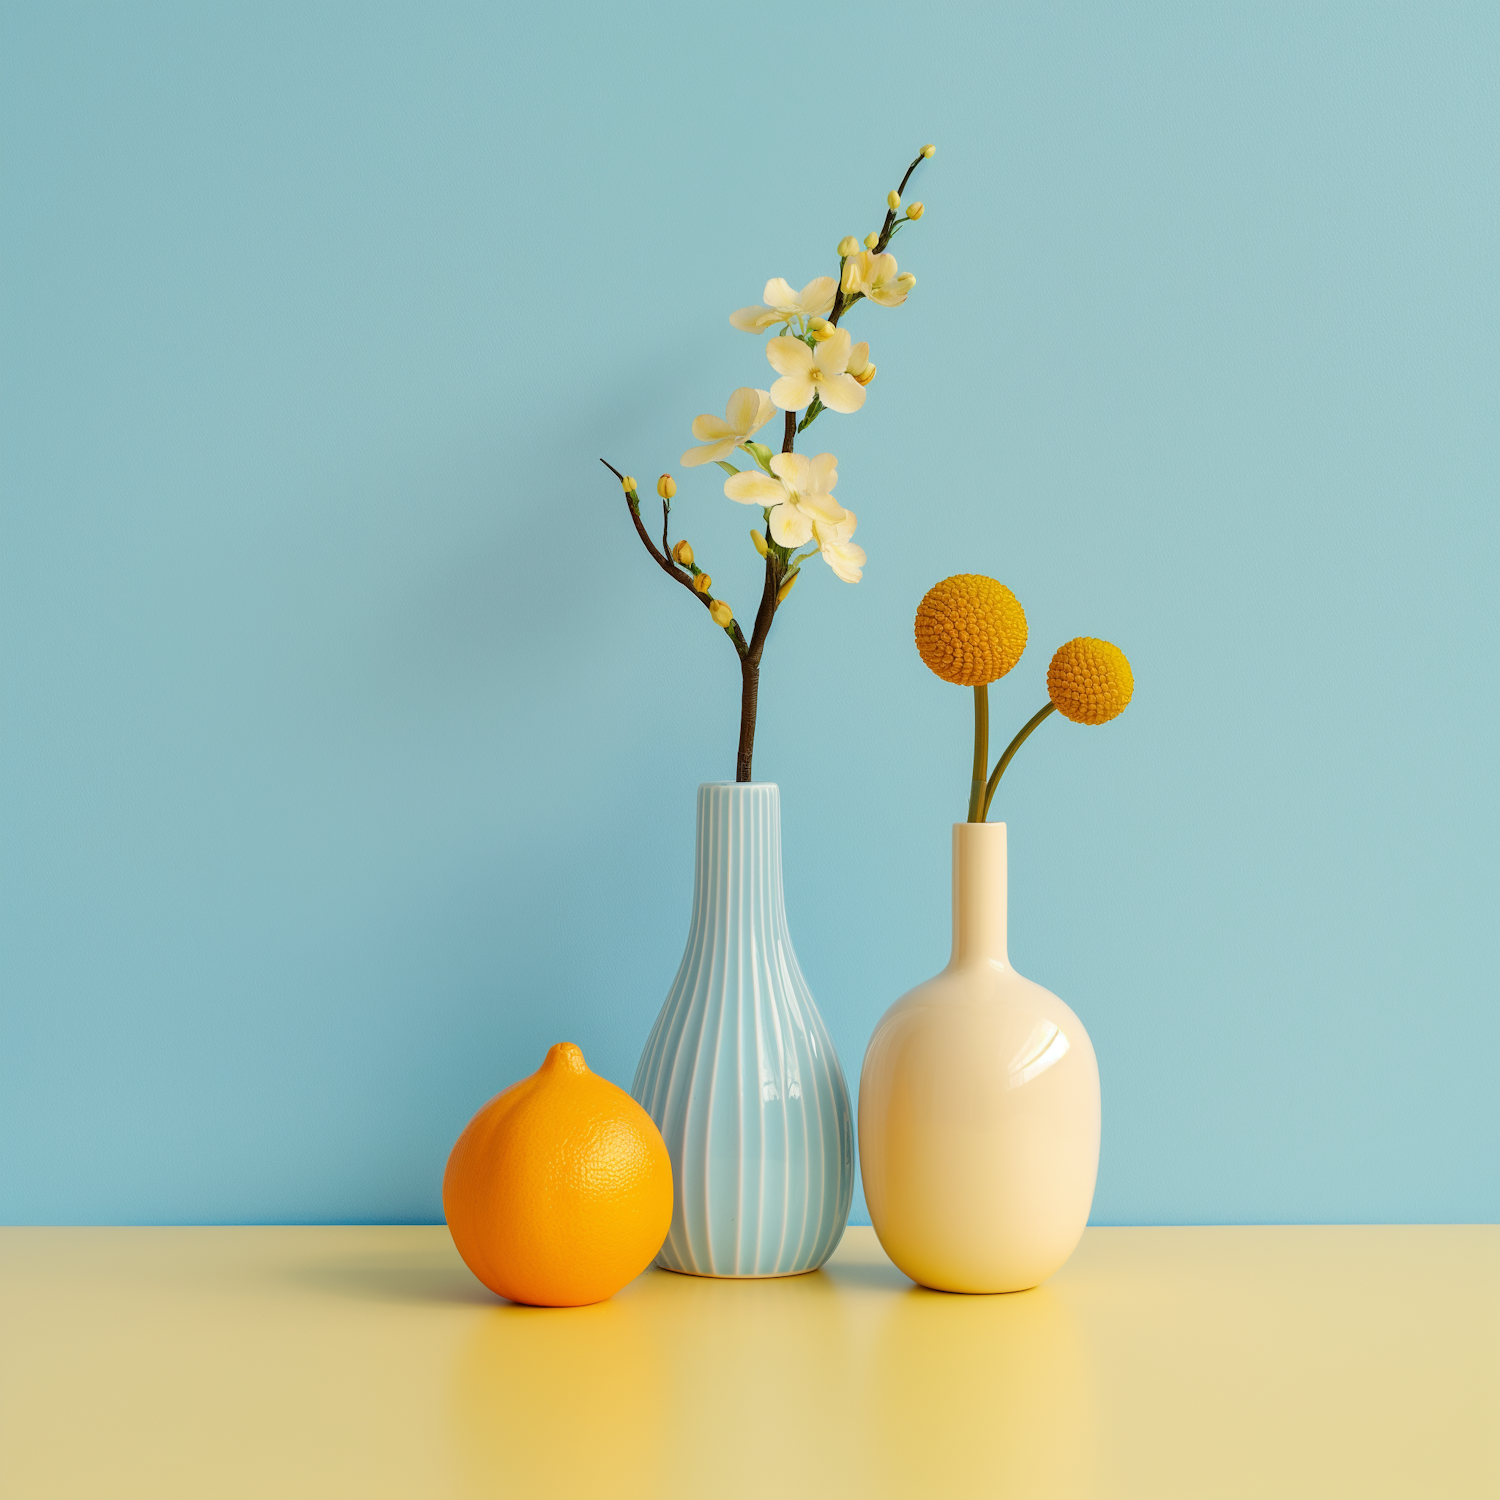 Serene Still Life with Vases and Citrus